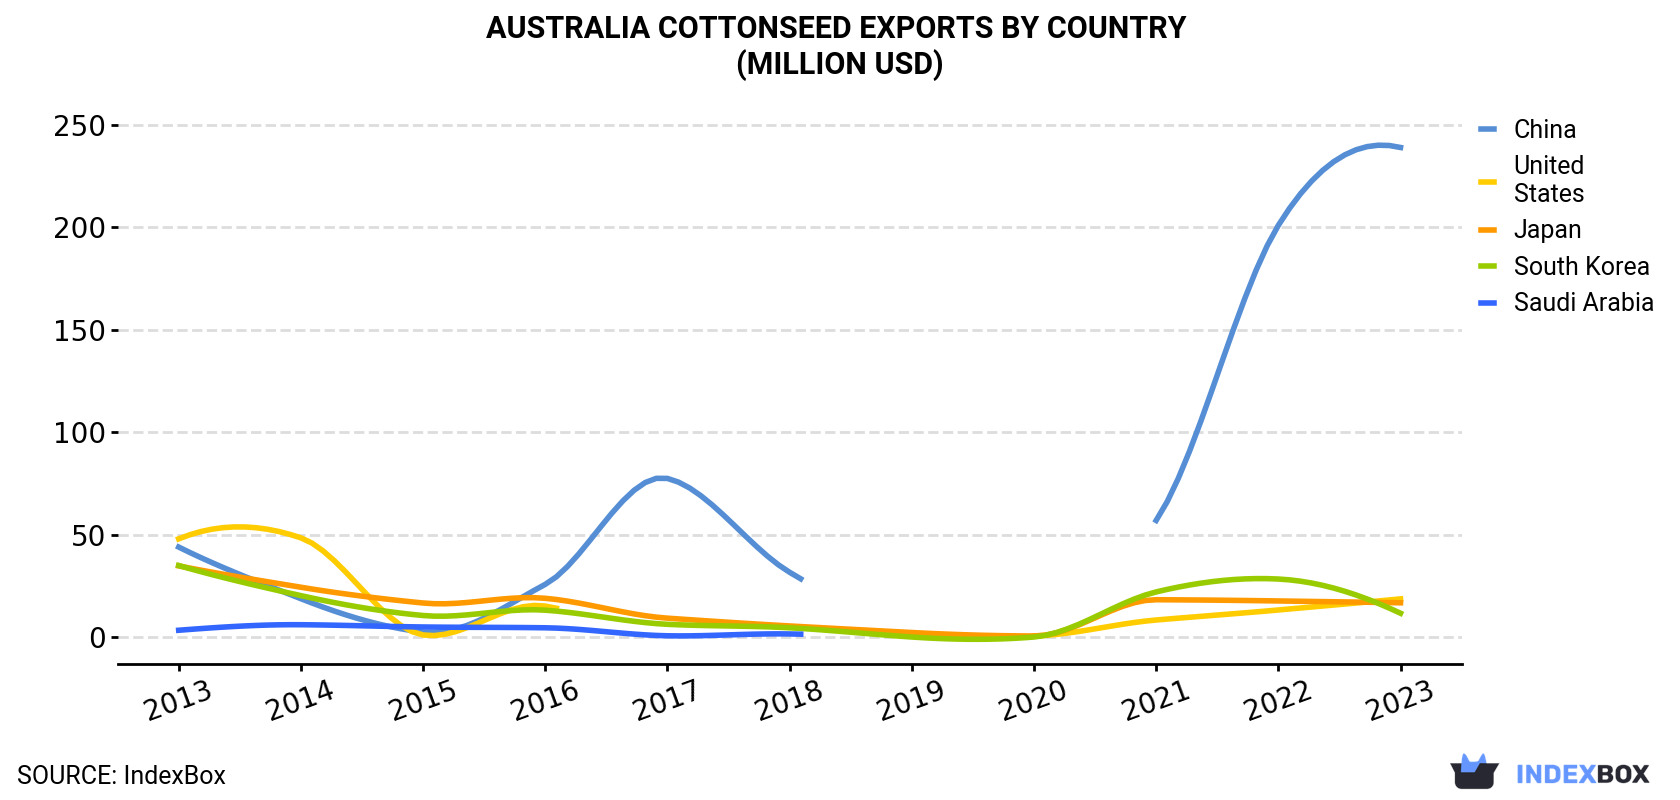 Australia Cottonseed Exports By Country (Million USD)